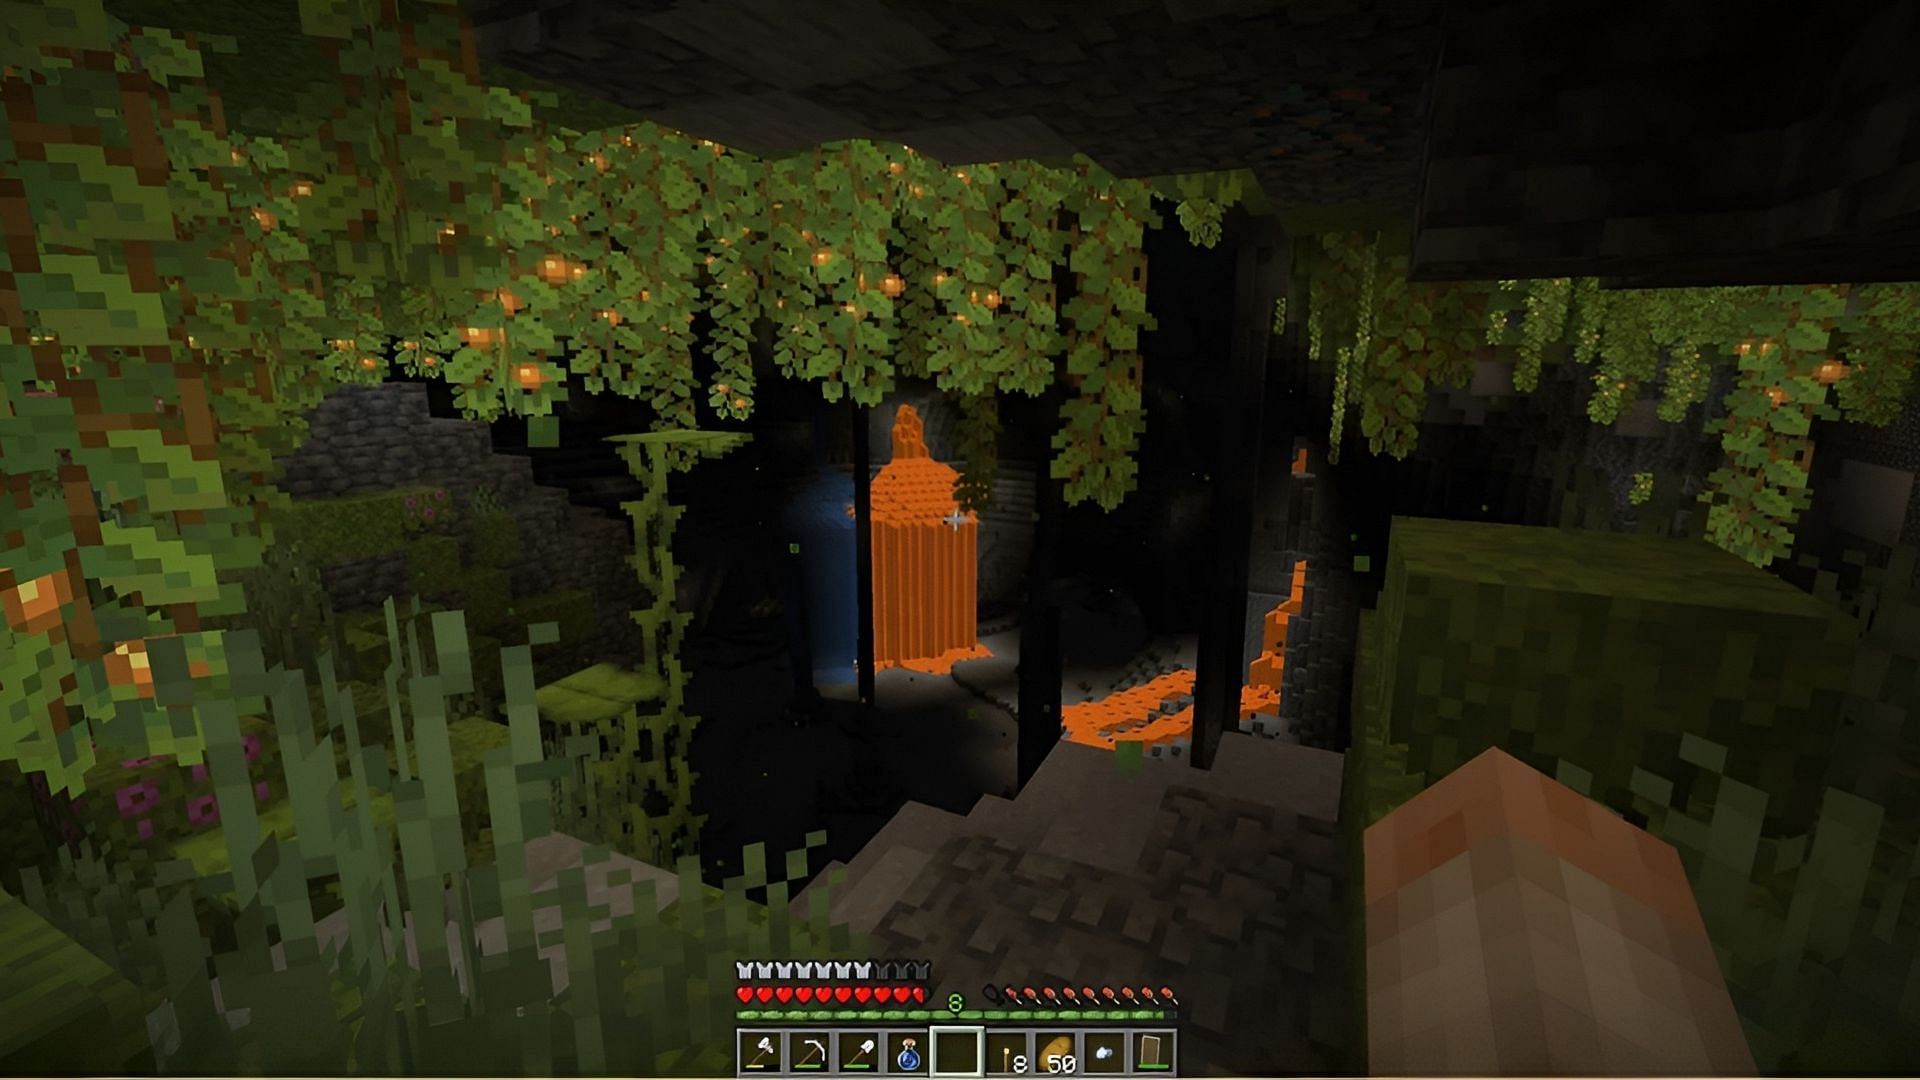 Why Minecraft needs to add more cave biomes in future updates